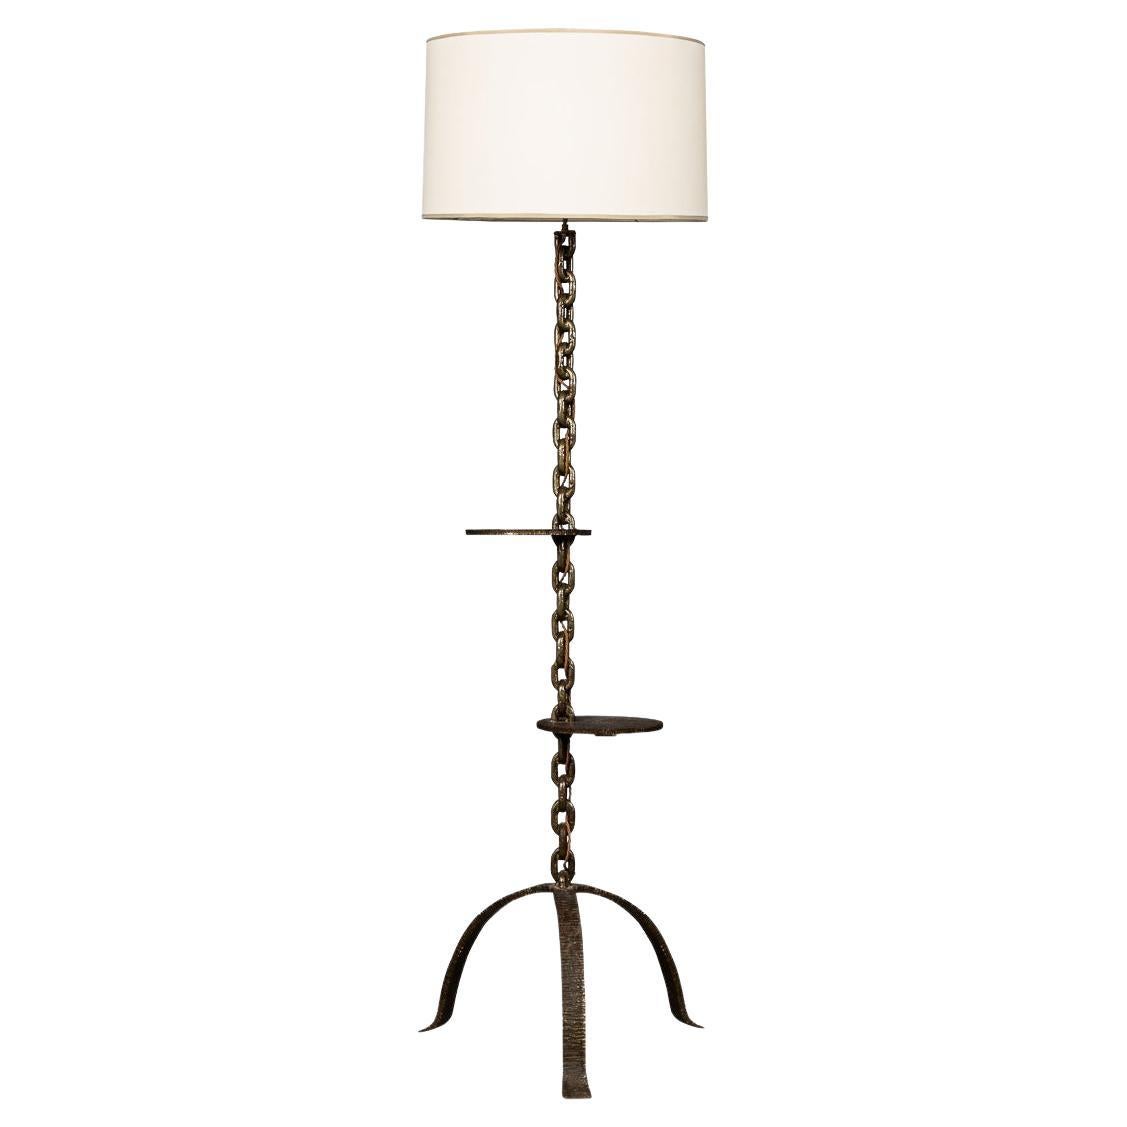 20th Century French Anchor Chain Freestanding Lamp with Shelves, circa 1930 For Sale